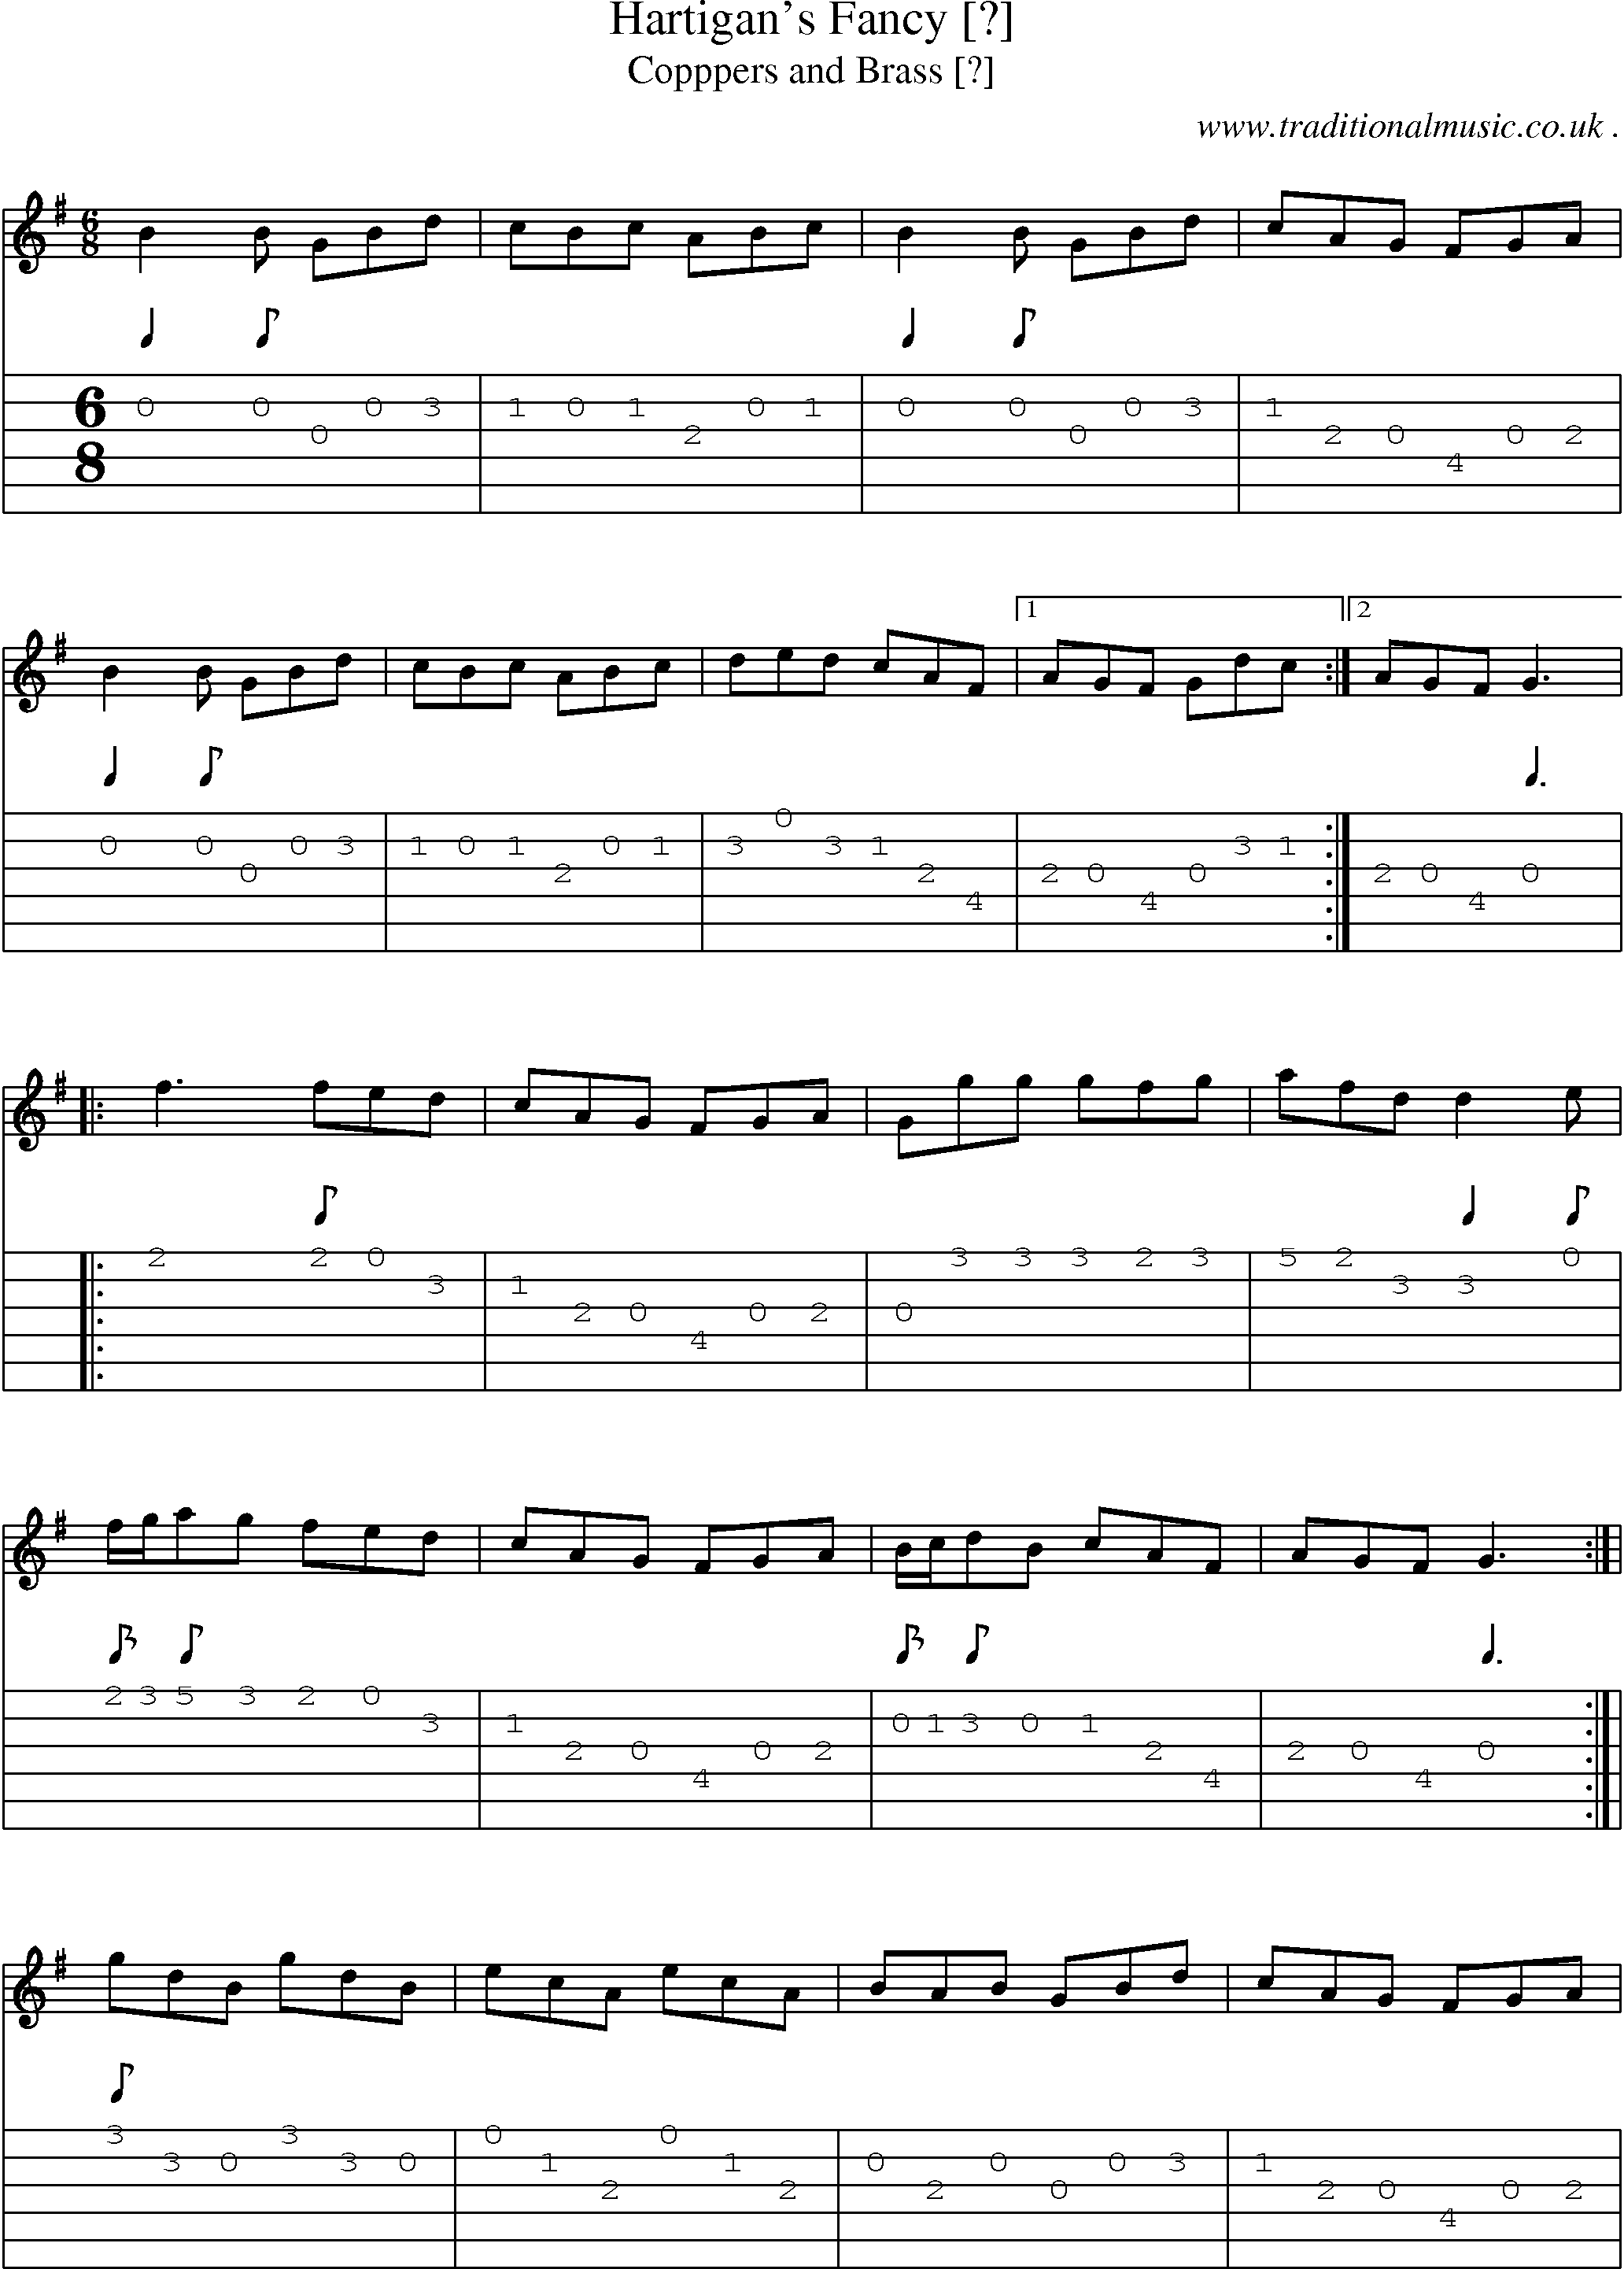 Sheet-Music and Guitar Tabs for Hartigans Fancy []